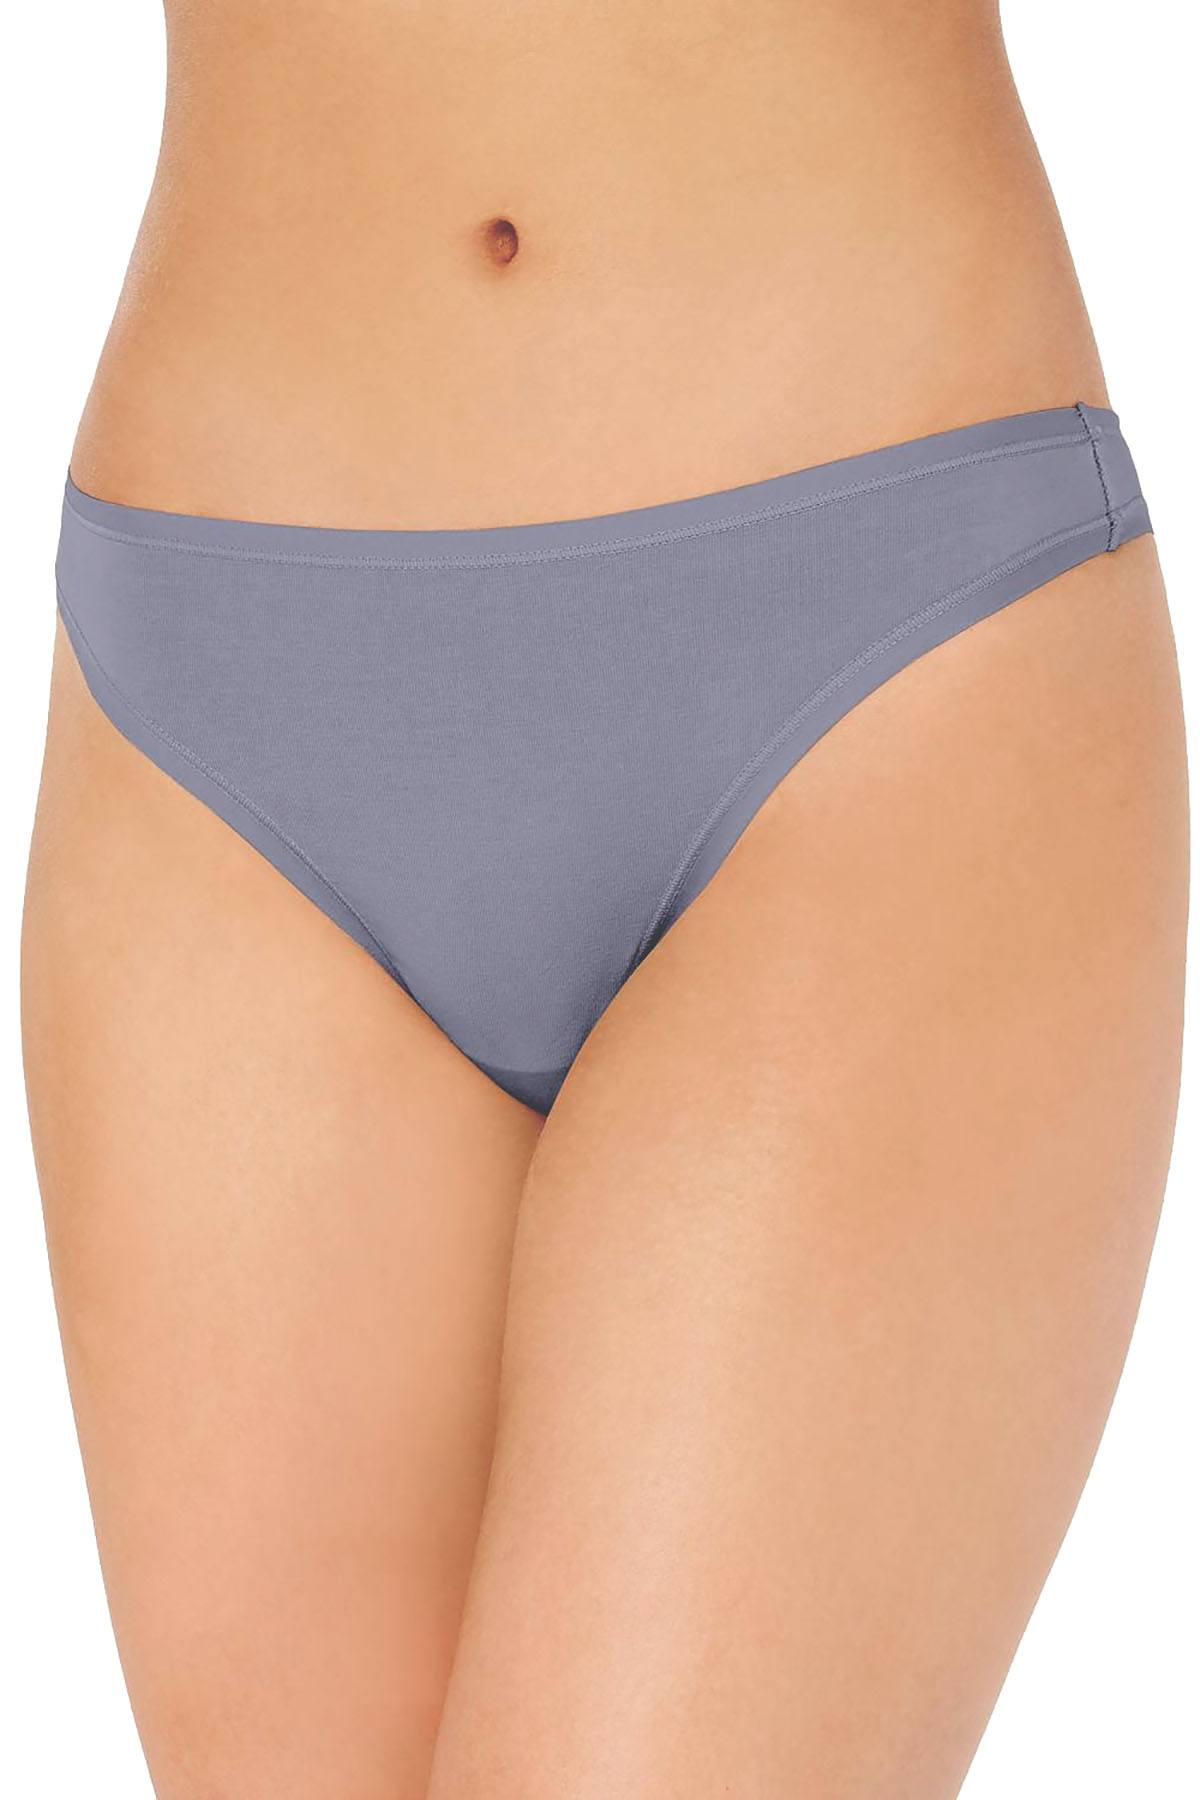 Charter Club Supima Cotton Thong in Wisteria